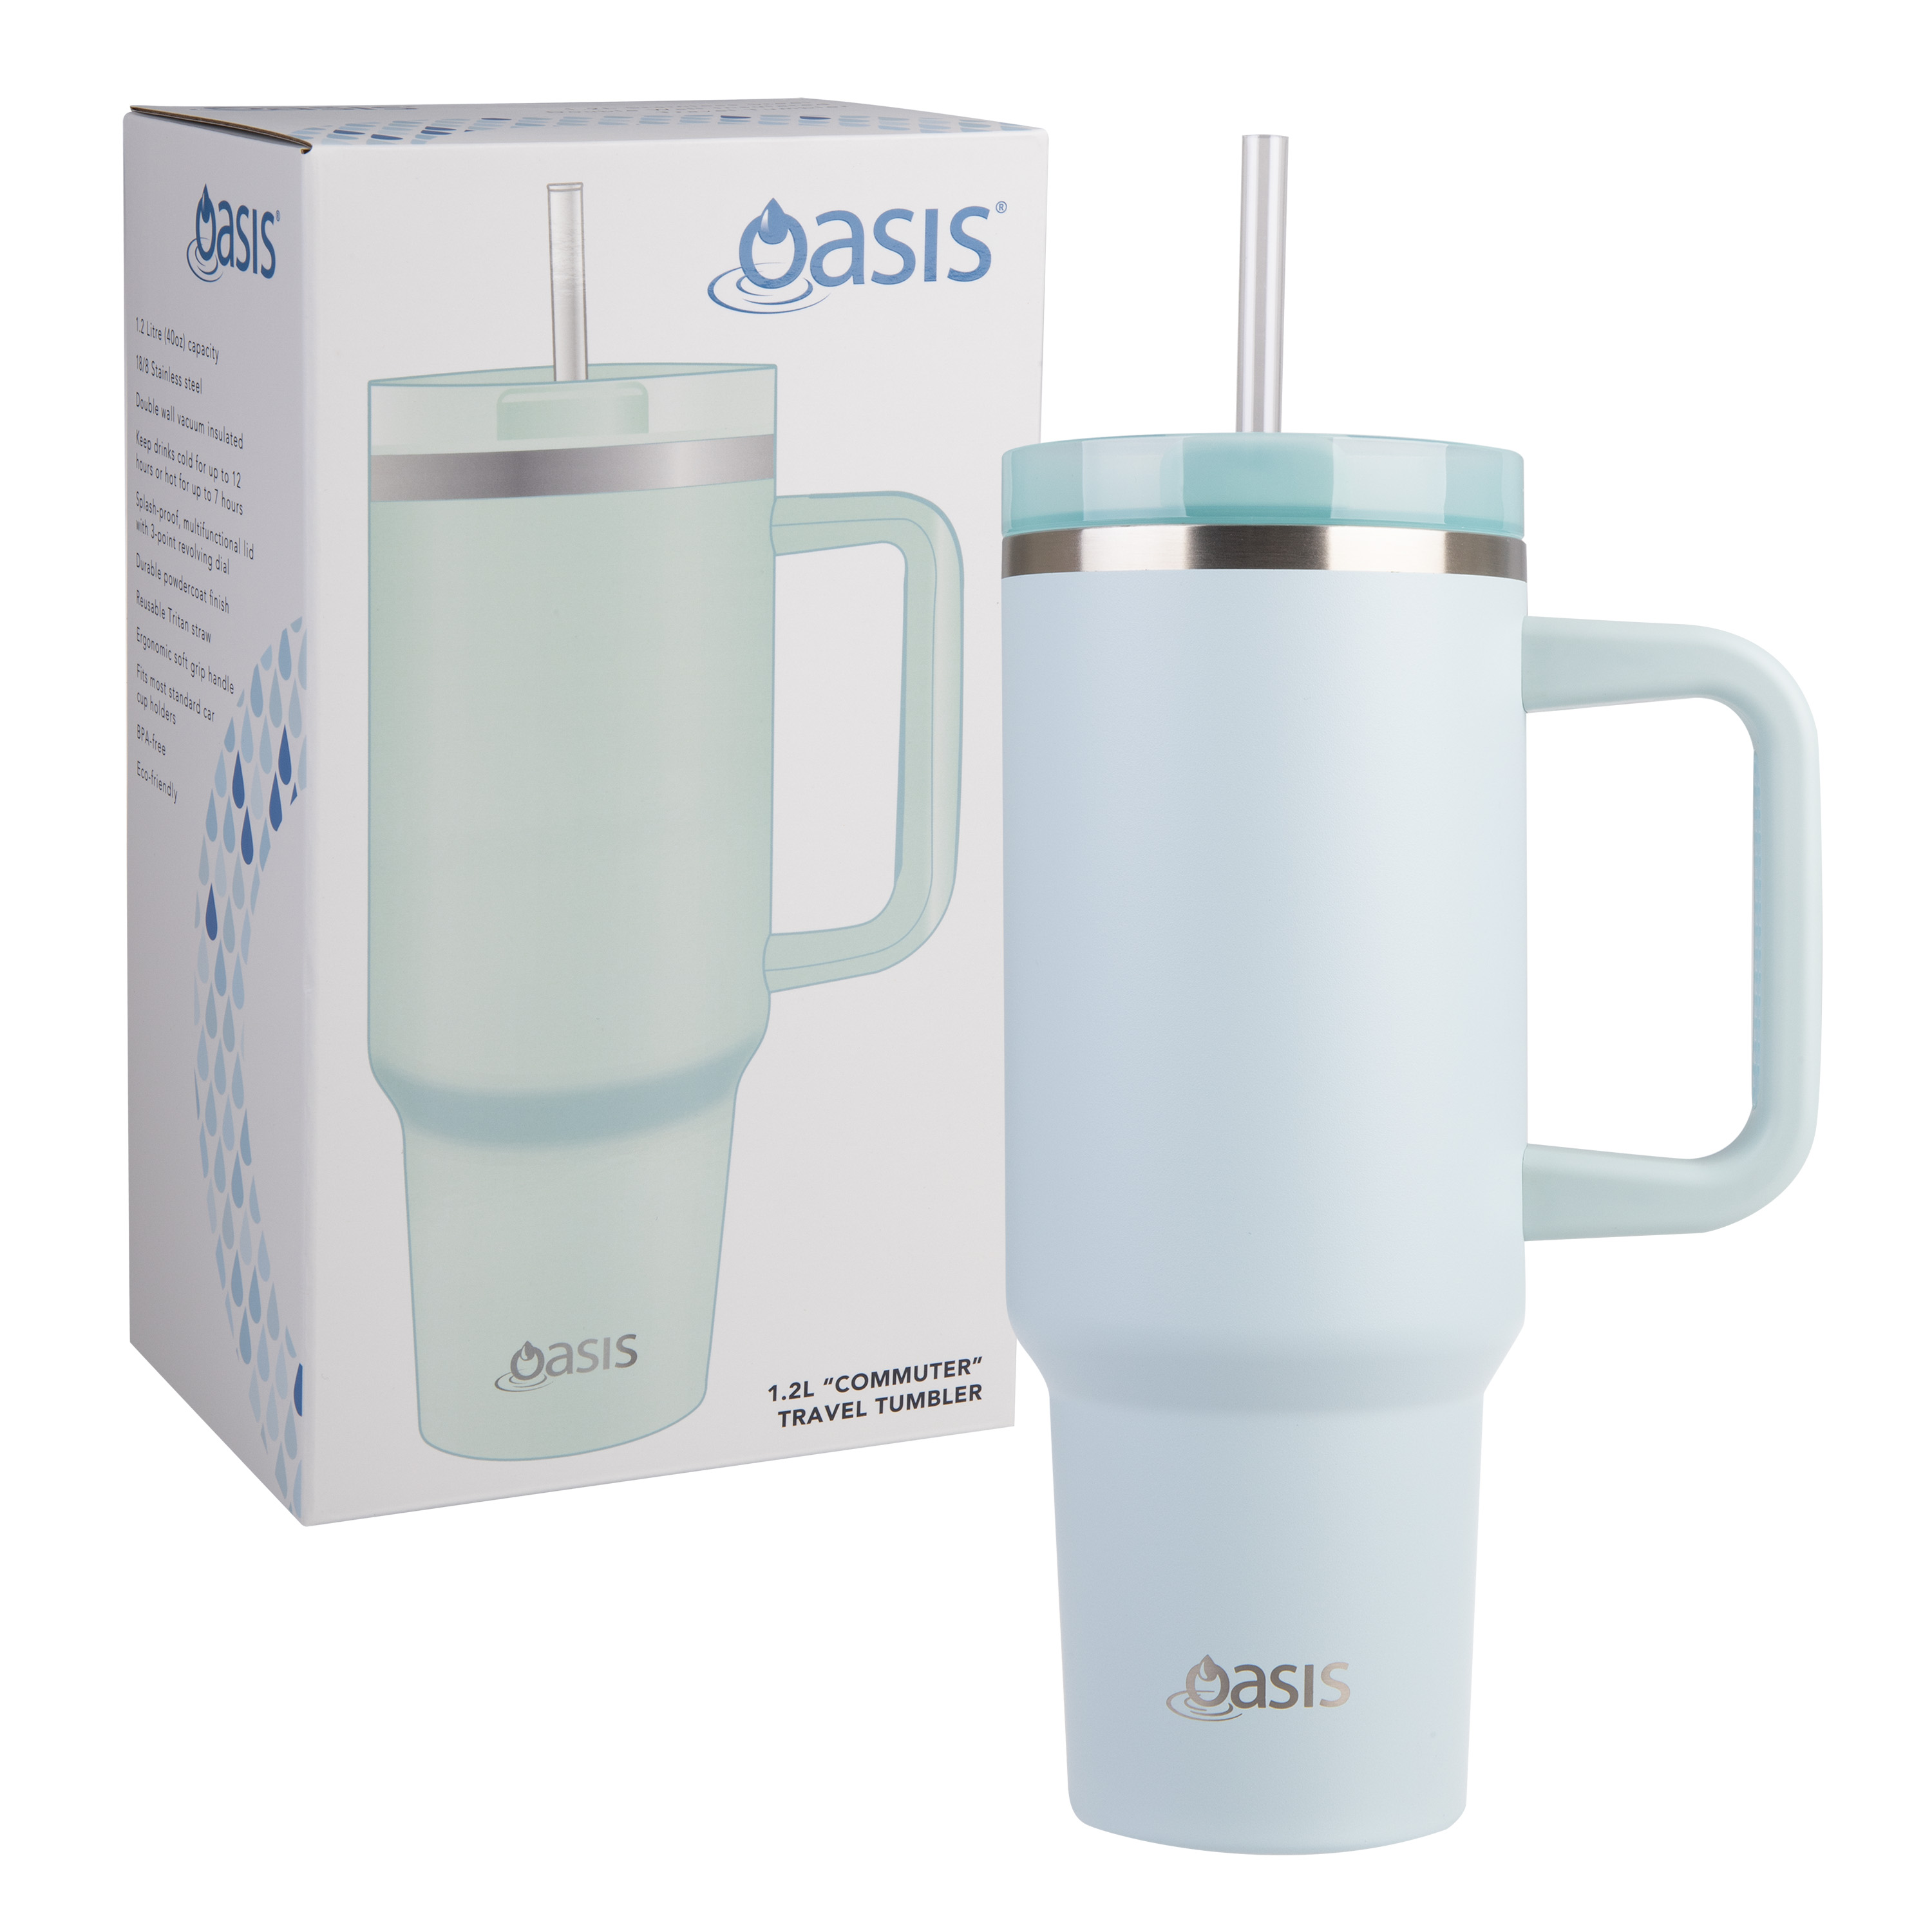 Oasis Stainless Steel Insulated Commuter Travel Tumbler Sea Mist